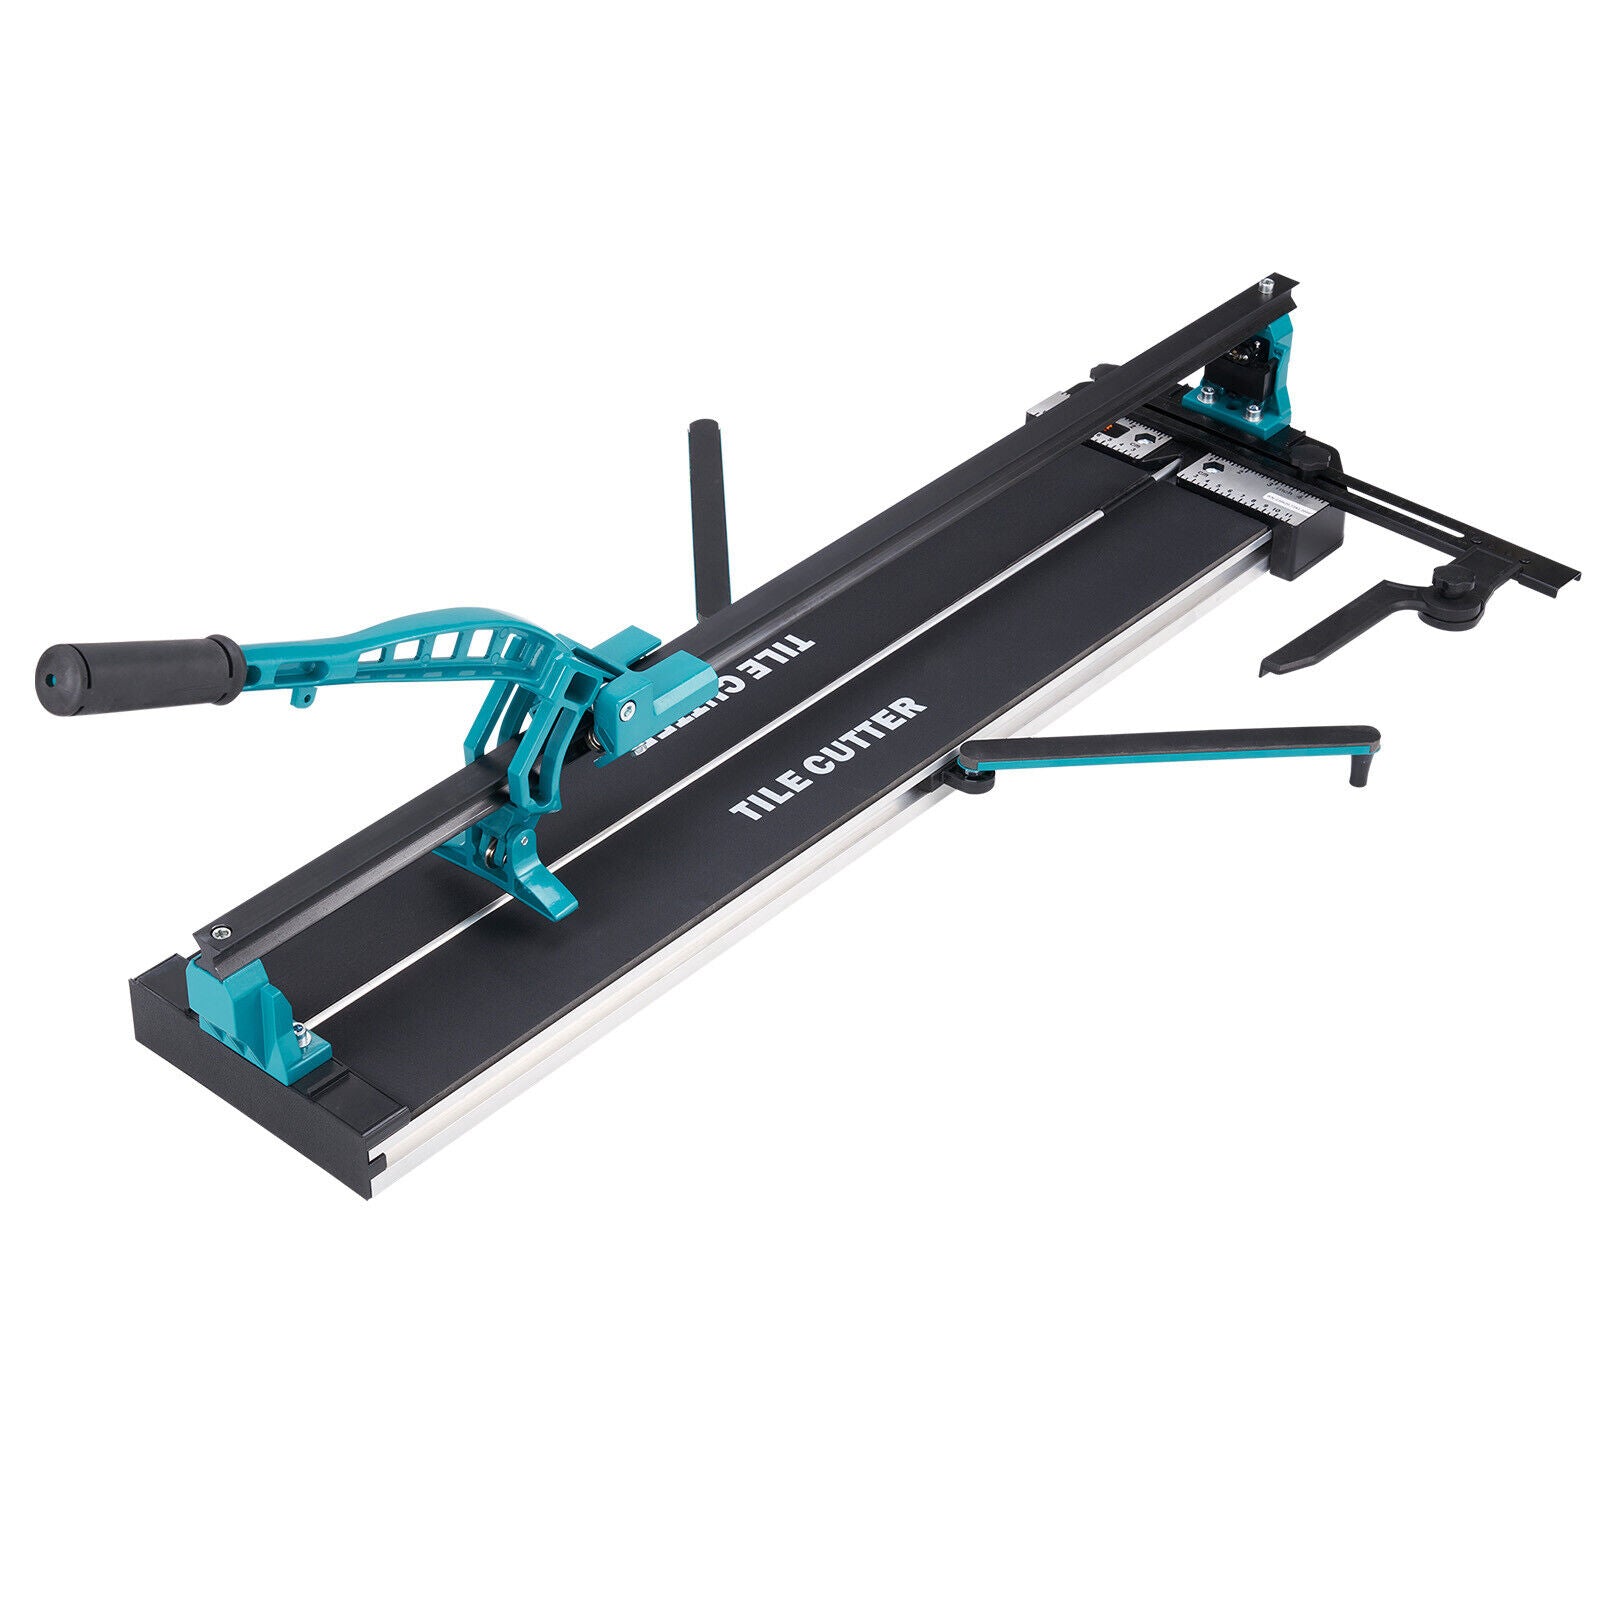 PREMIUM 800mm Manual Tile Cutter Cutting Machine With Infrared for Porcelain